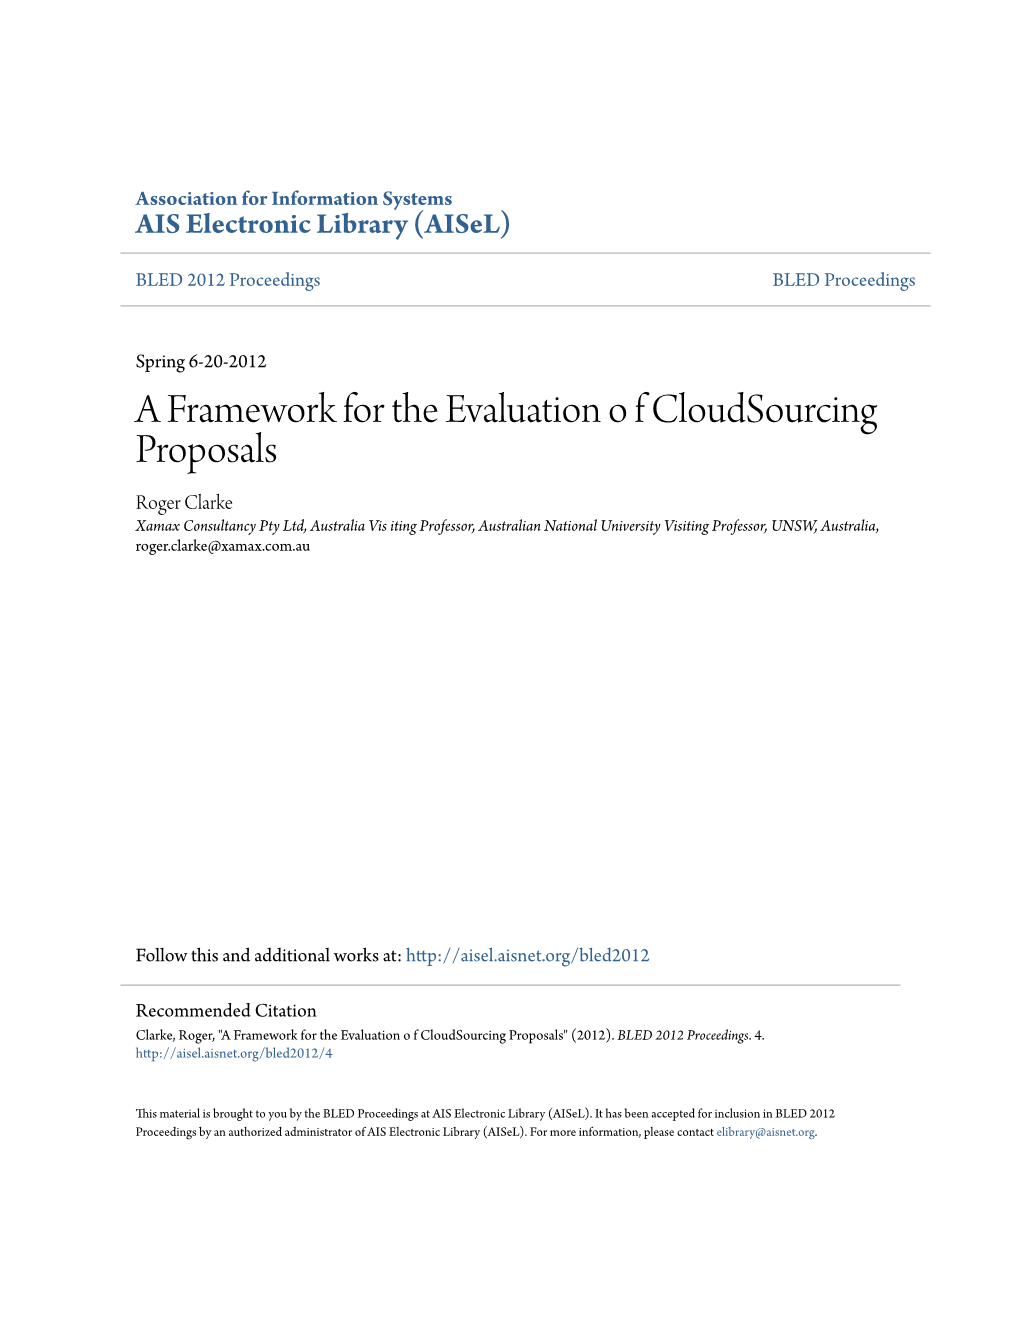 A Framework for the Evaluation O F Cloudsourcing Proposals